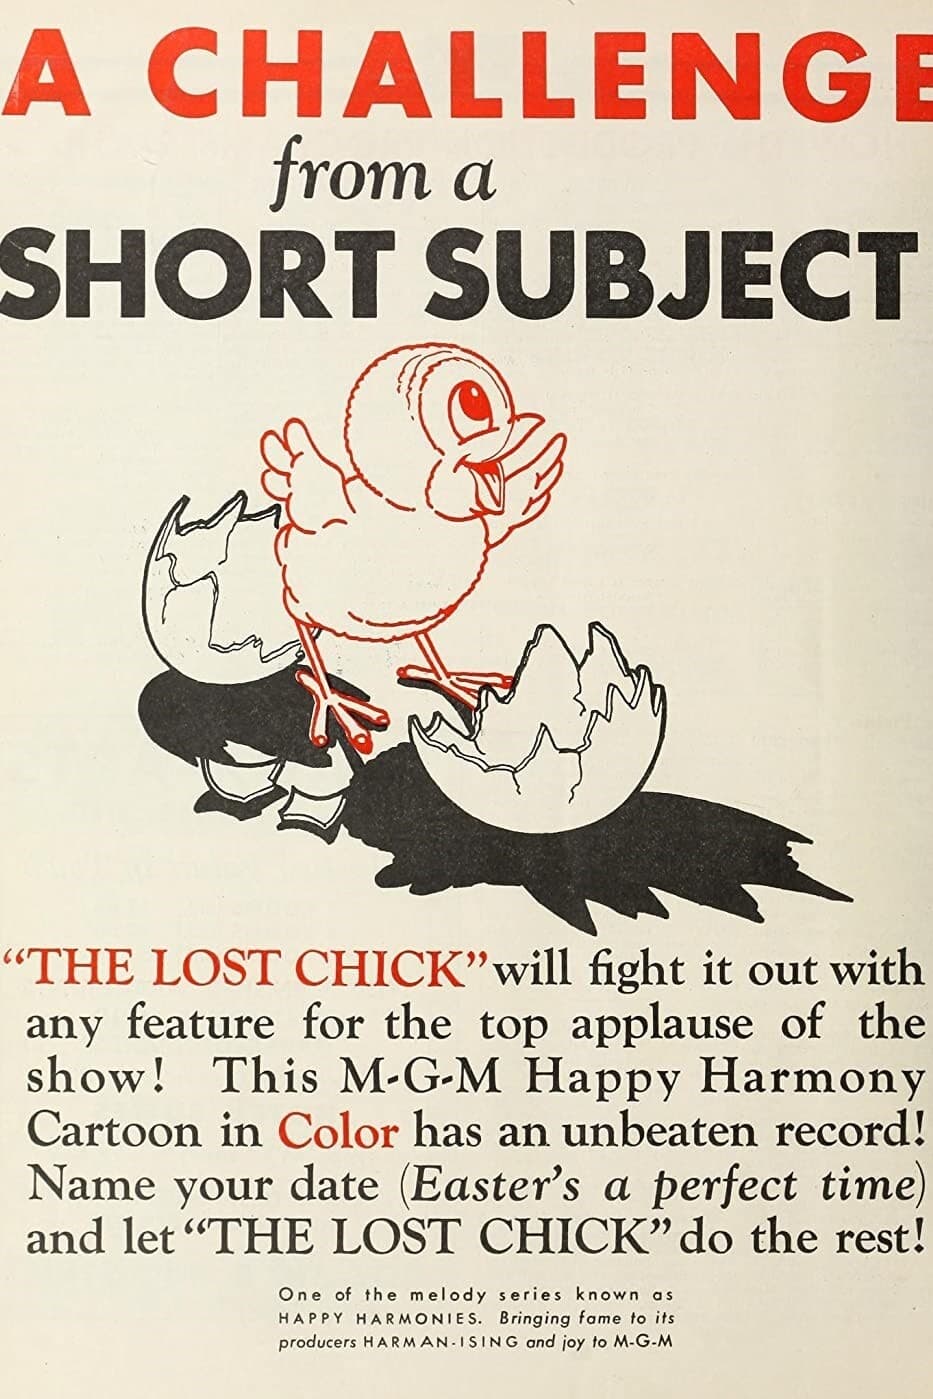 The Lost Chick